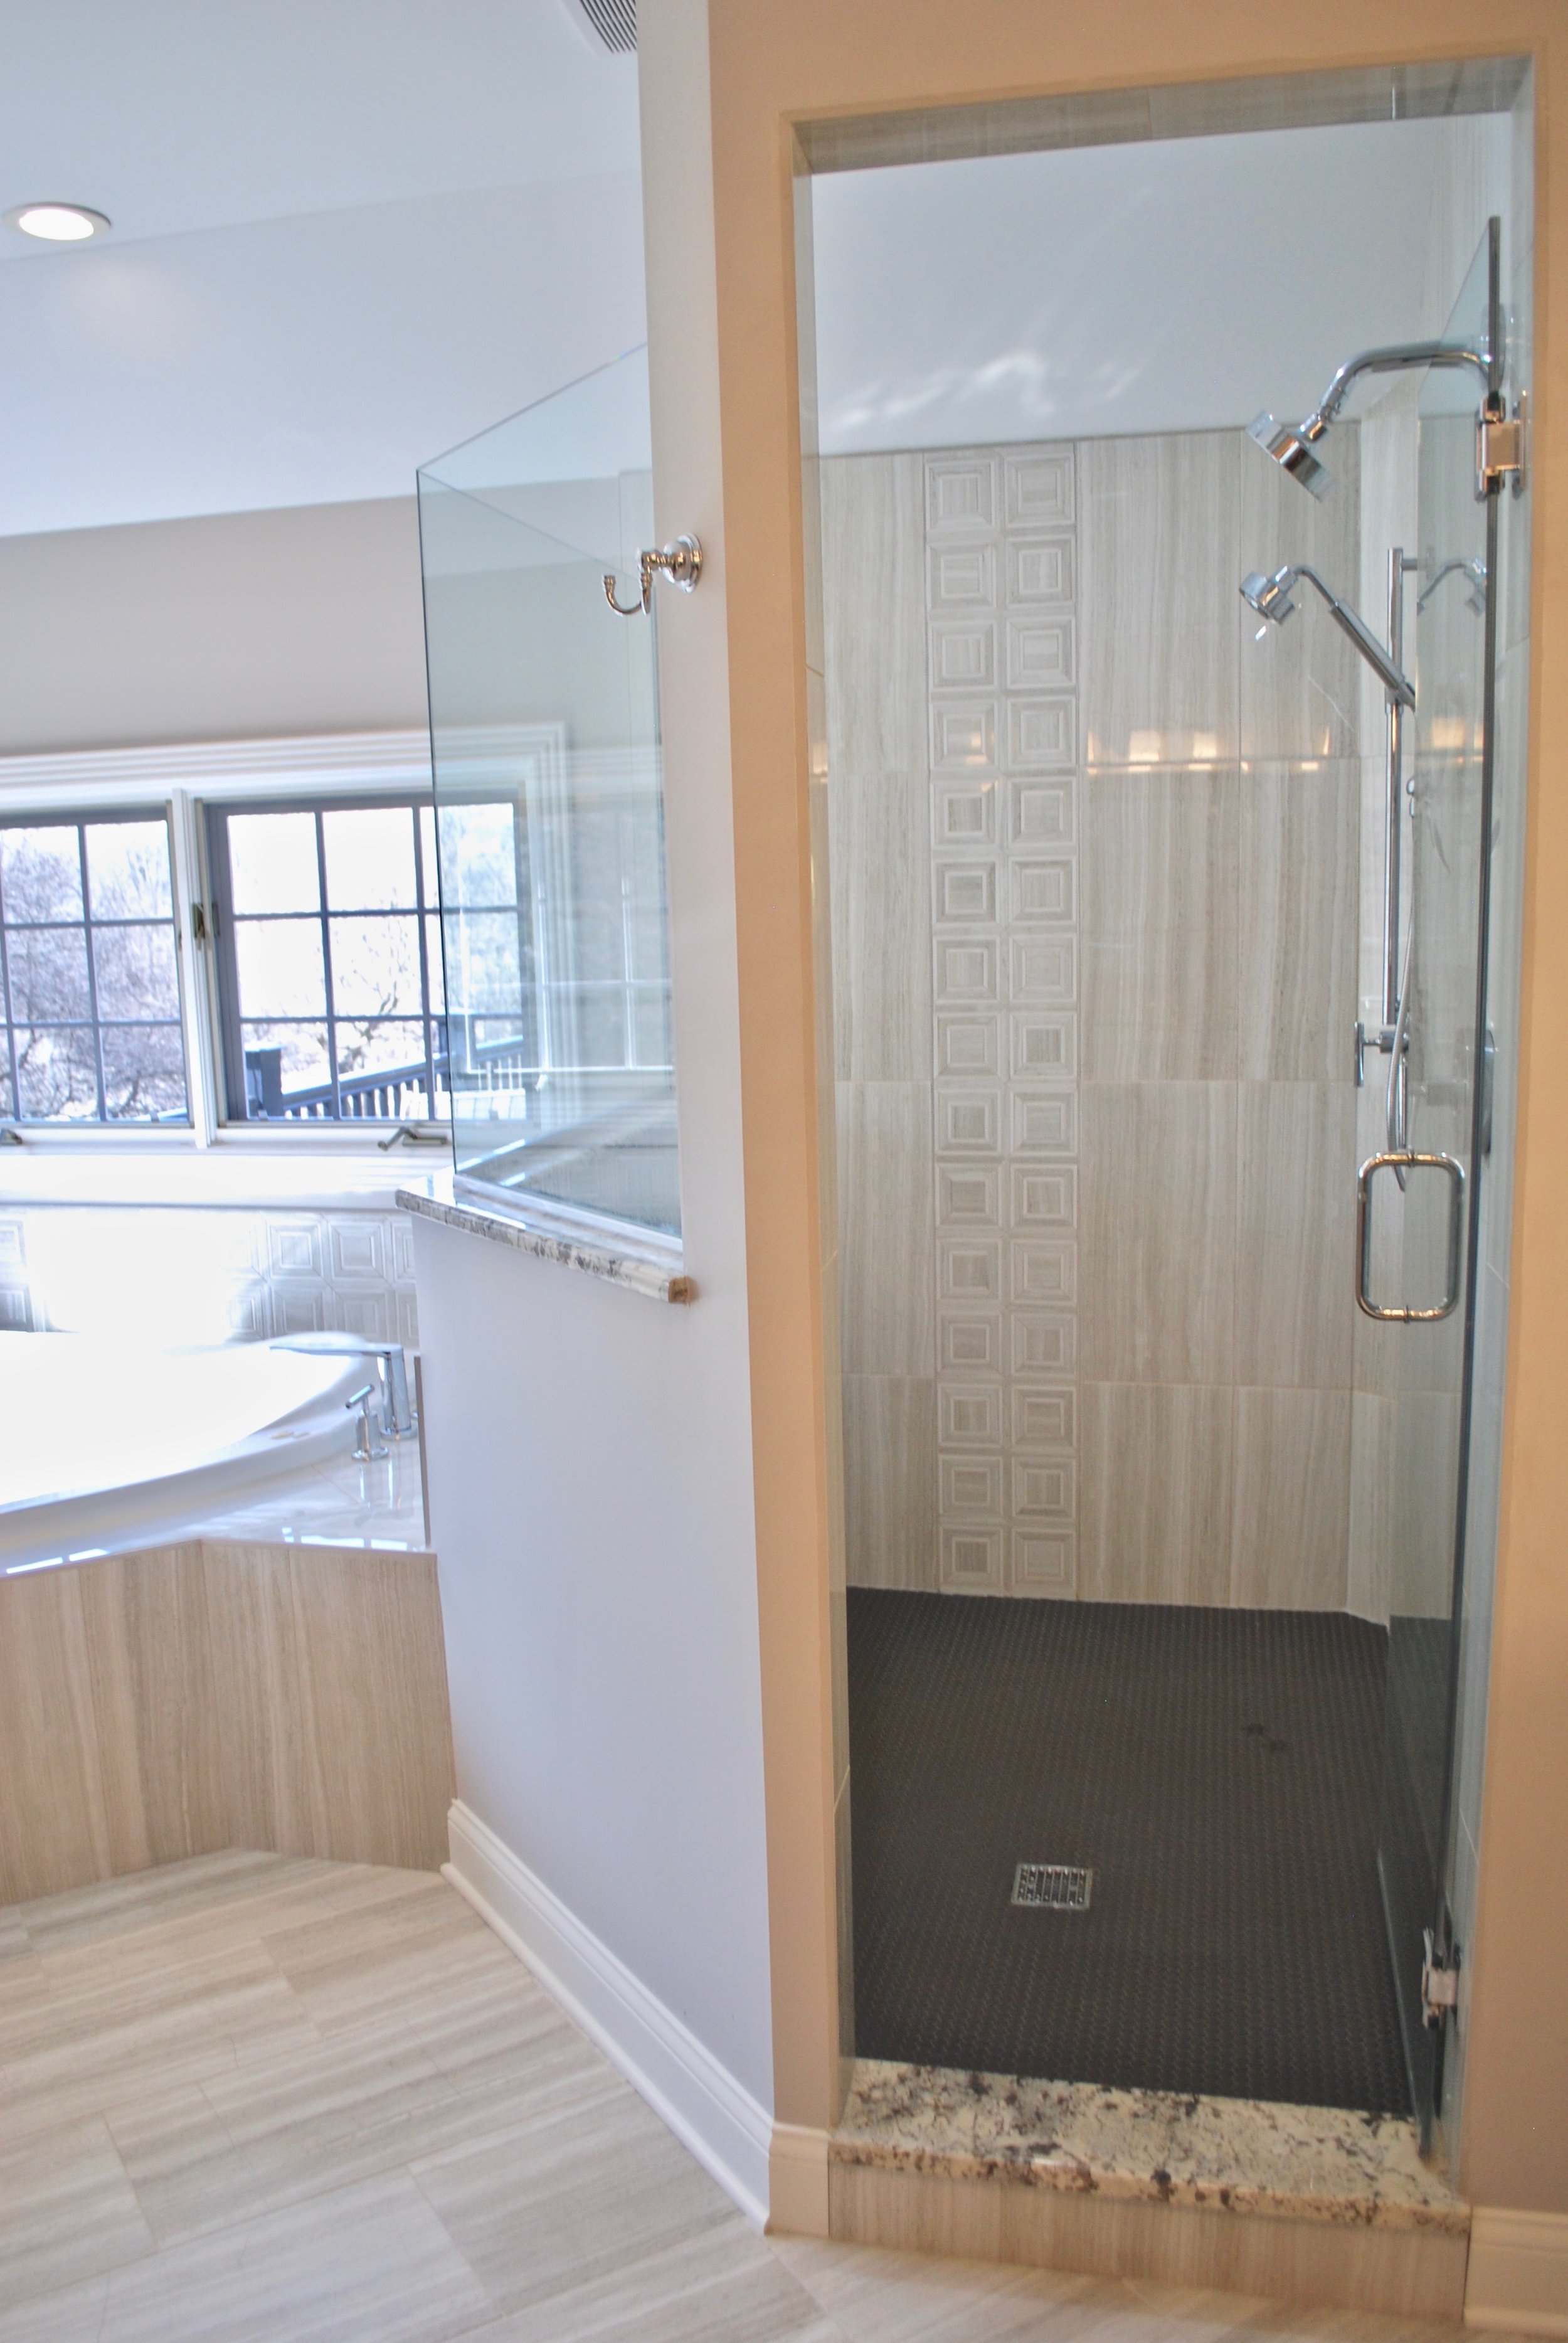 SHOWER REMODEL &amp; EXPANSION IN THIS NAPERVILLE IL CUSTOM BATHROOM.  TRANSITIONAL &amp; GREY TILE